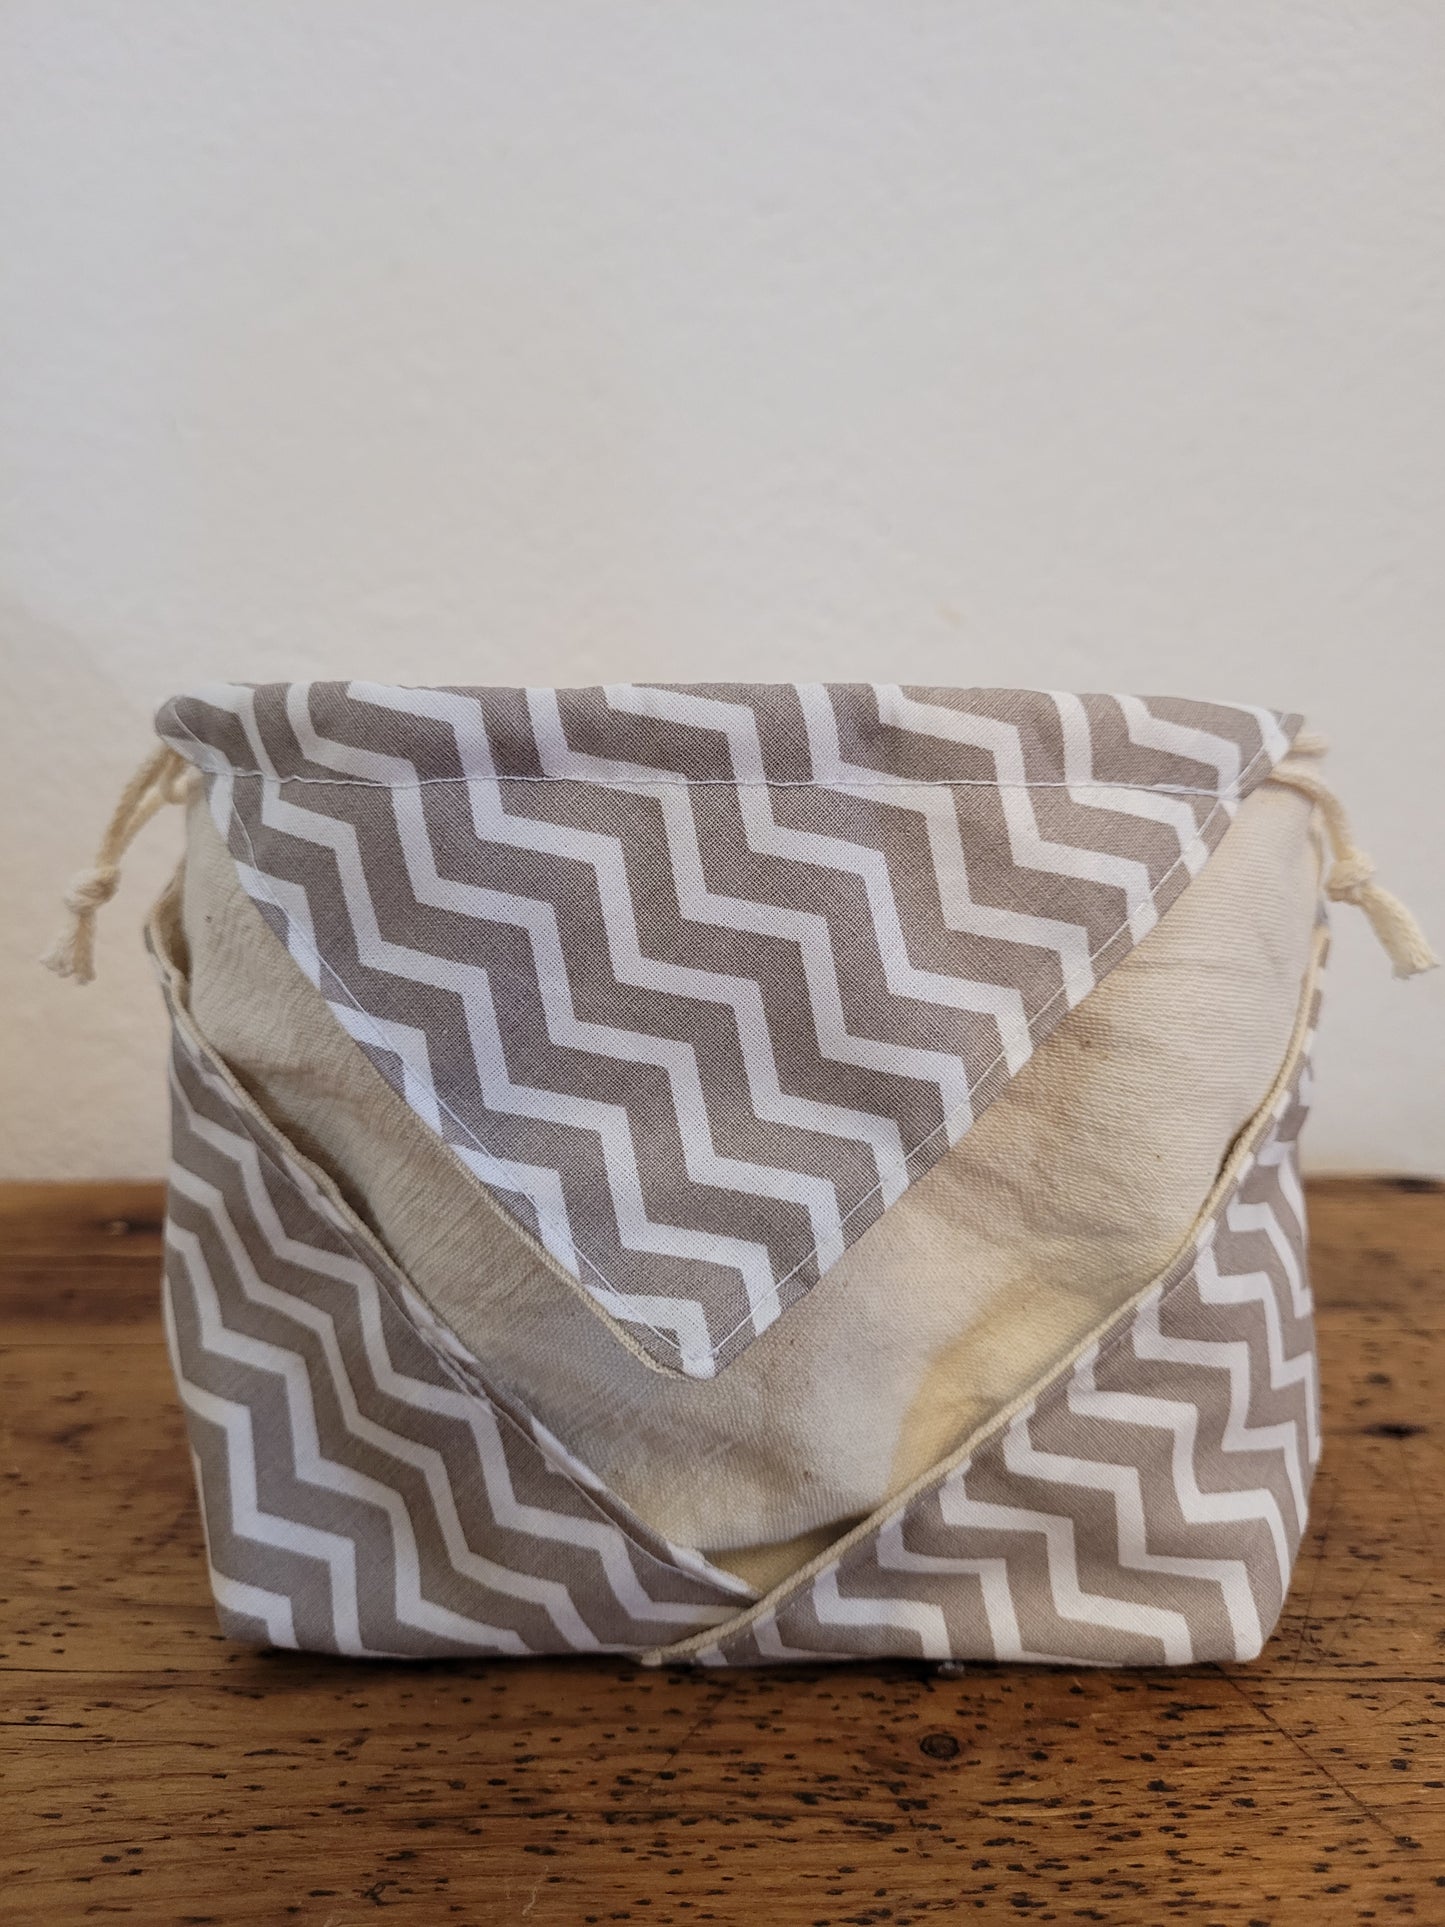 The striped pouch and its 10 washable cottons